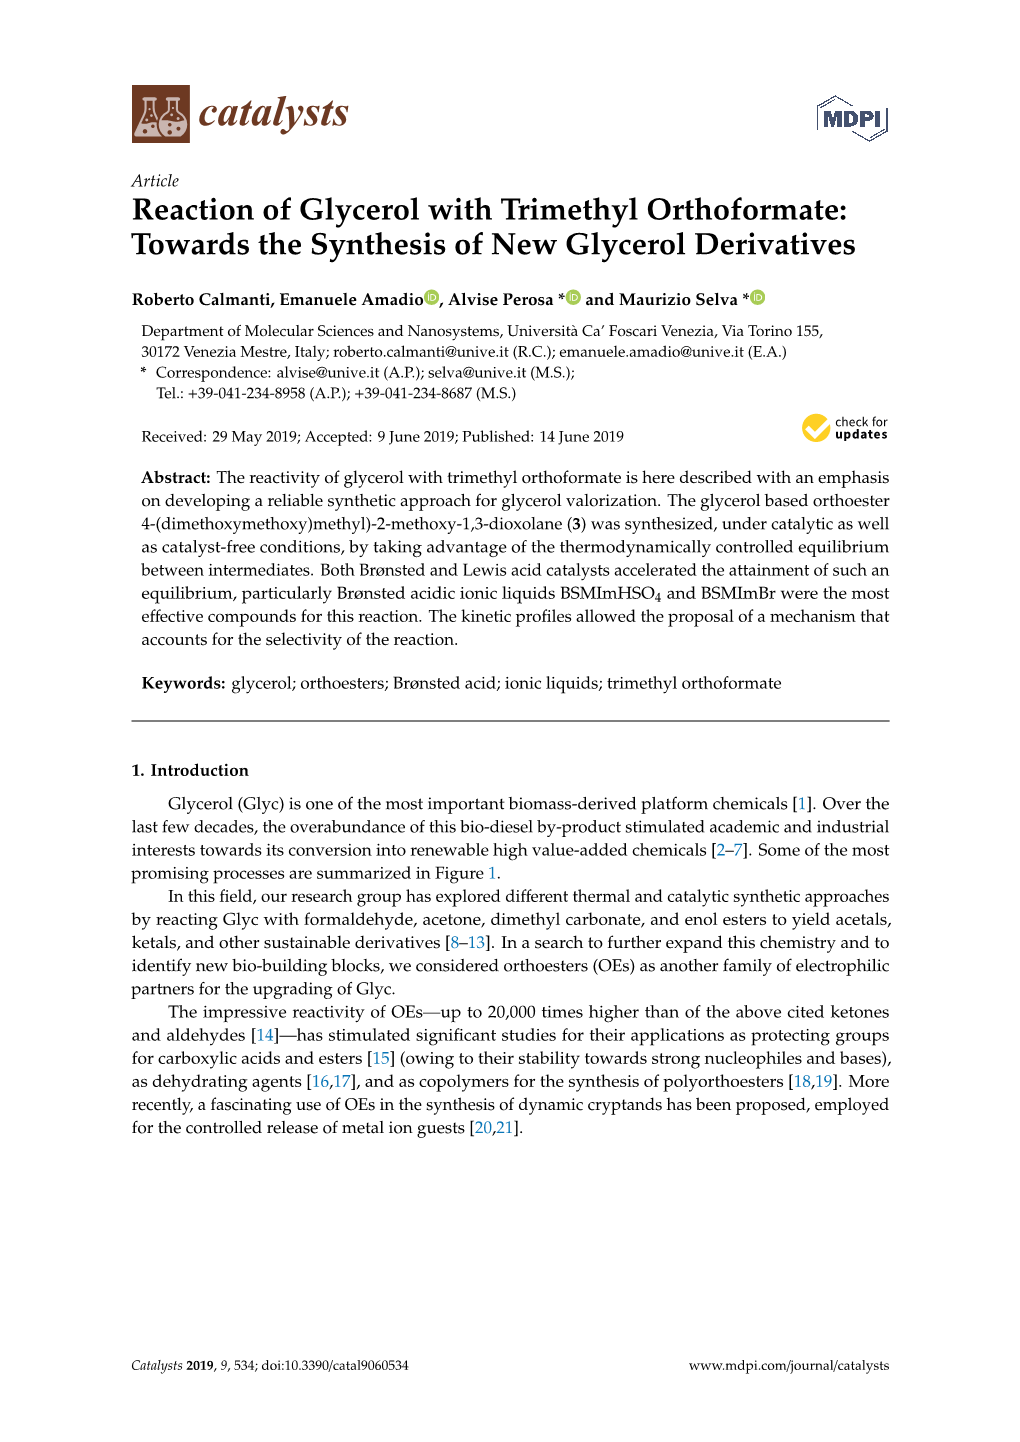 Reaction of Glycerol with Trimethyl Orthoformate: Towards the Synthesis of New Glycerol Derivatives